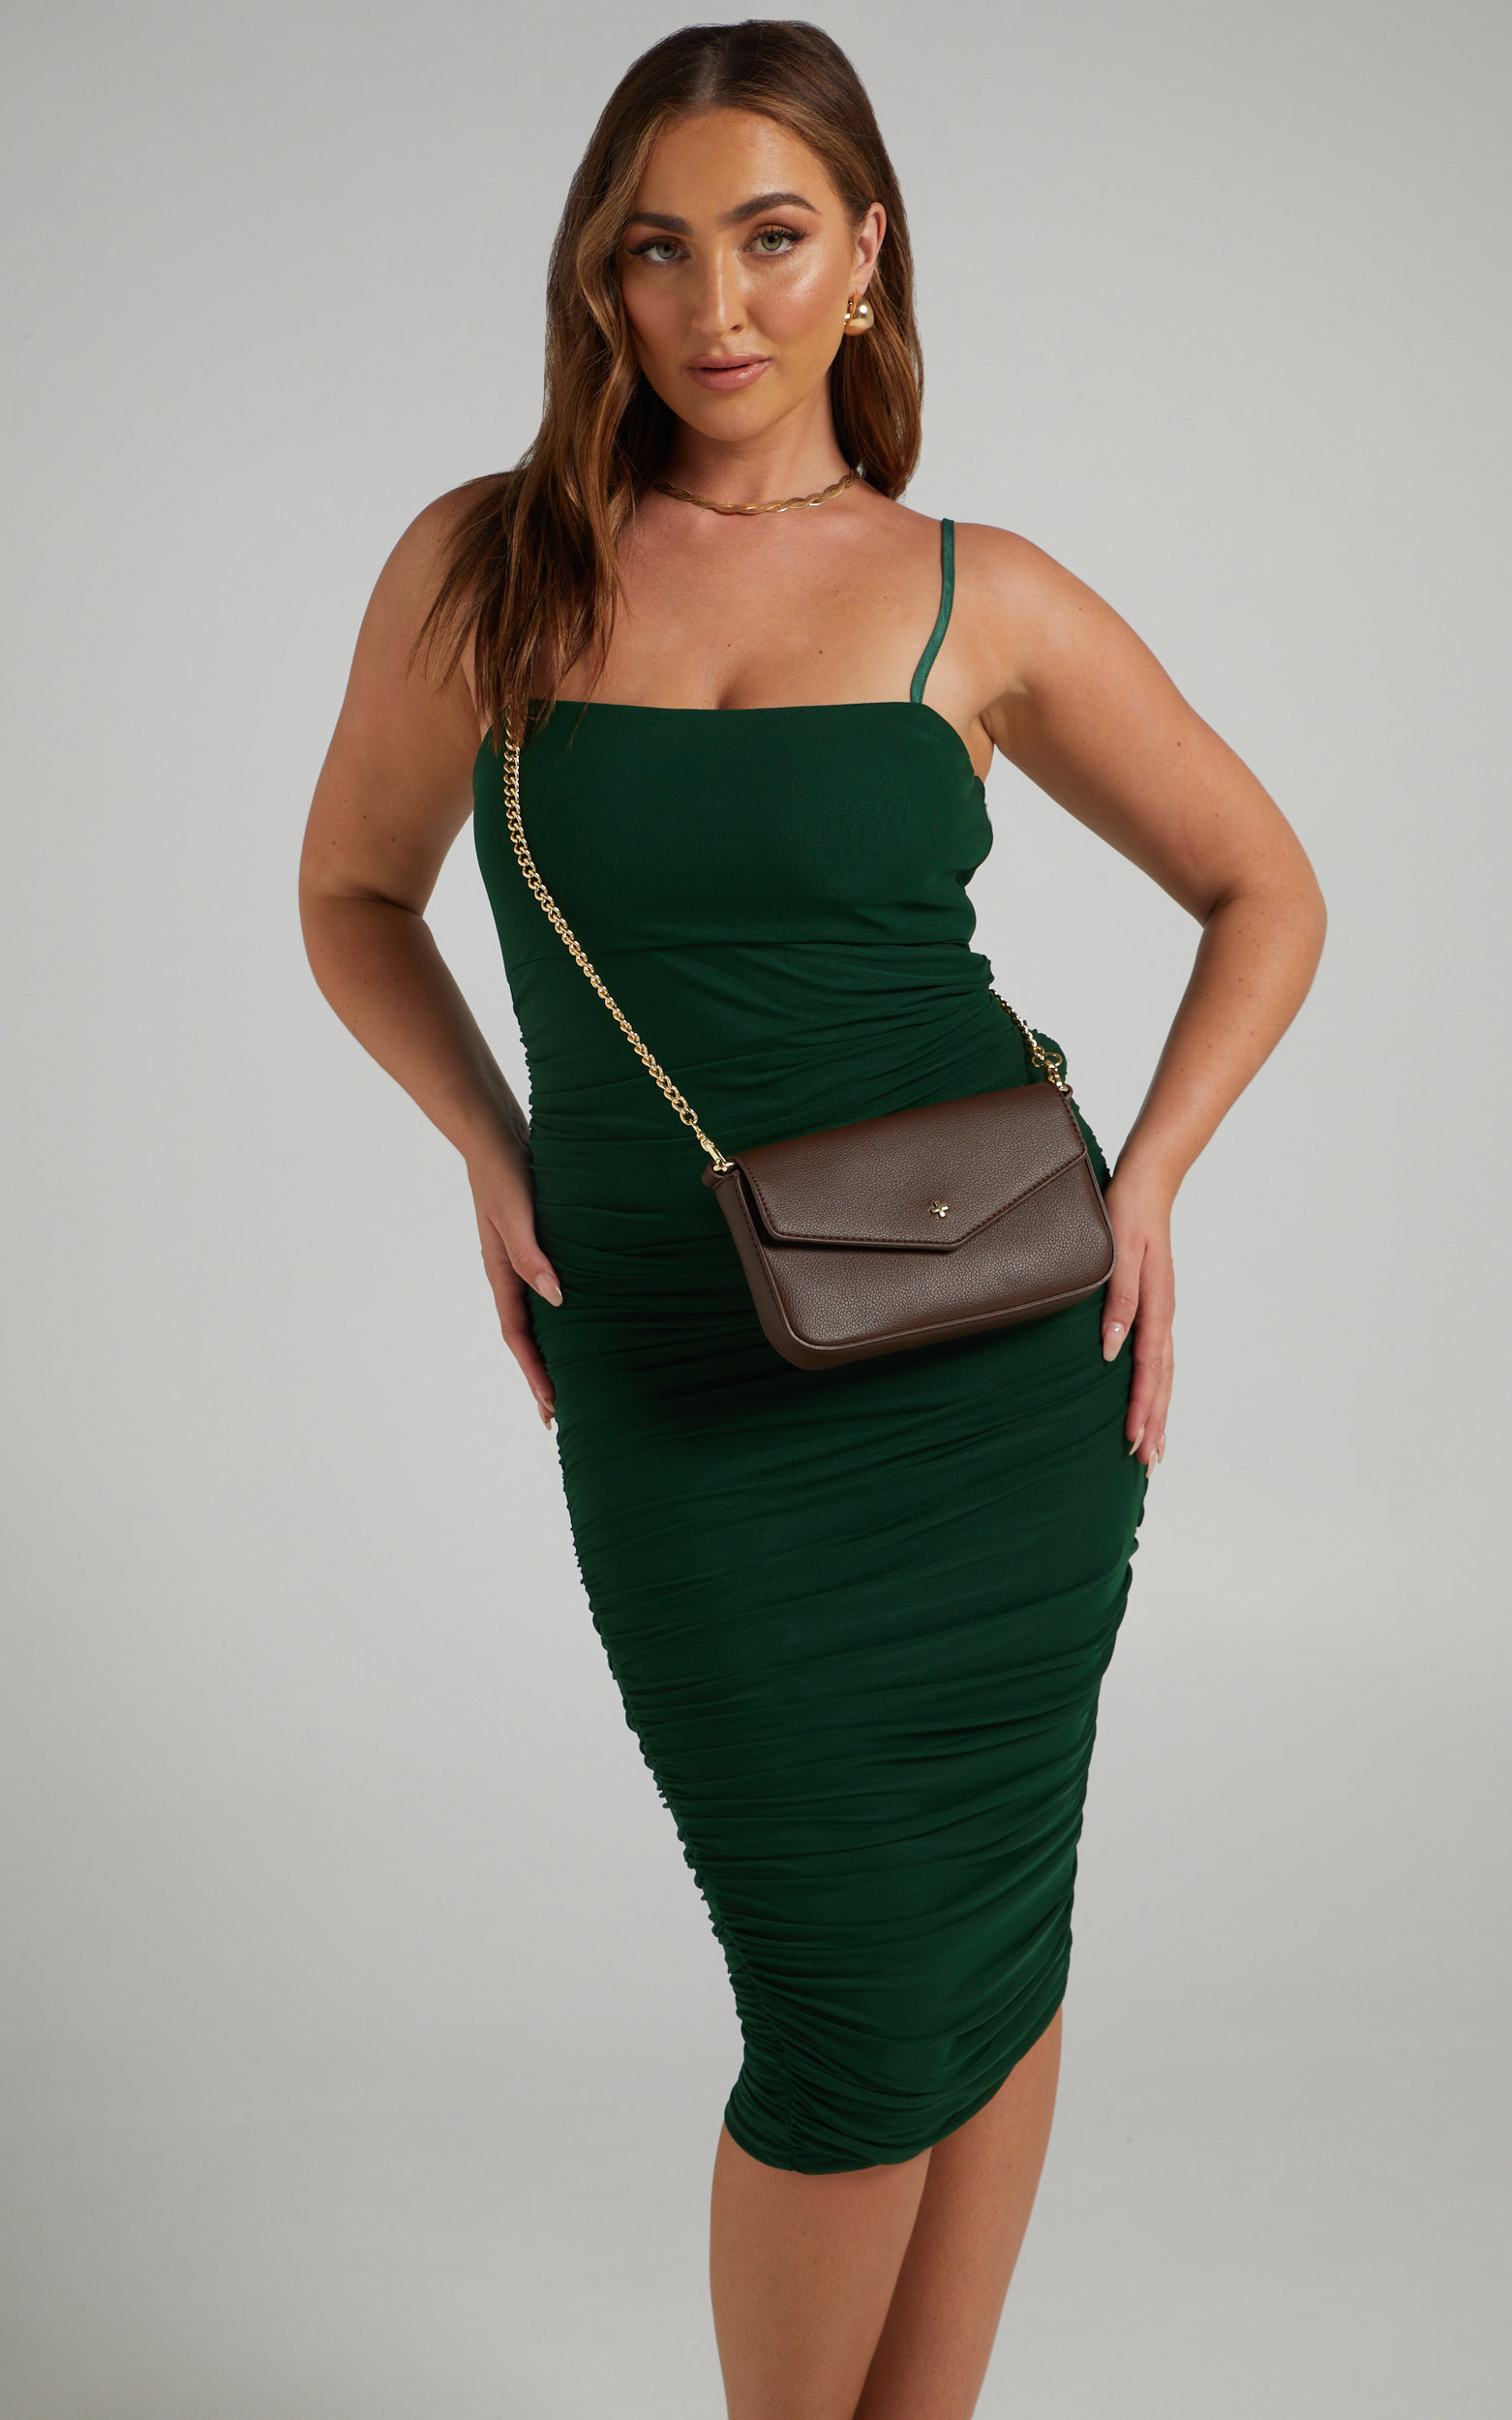 Coming For You Mesh Midi Dress in Emerald - 04, GRN2, hi-res image number null